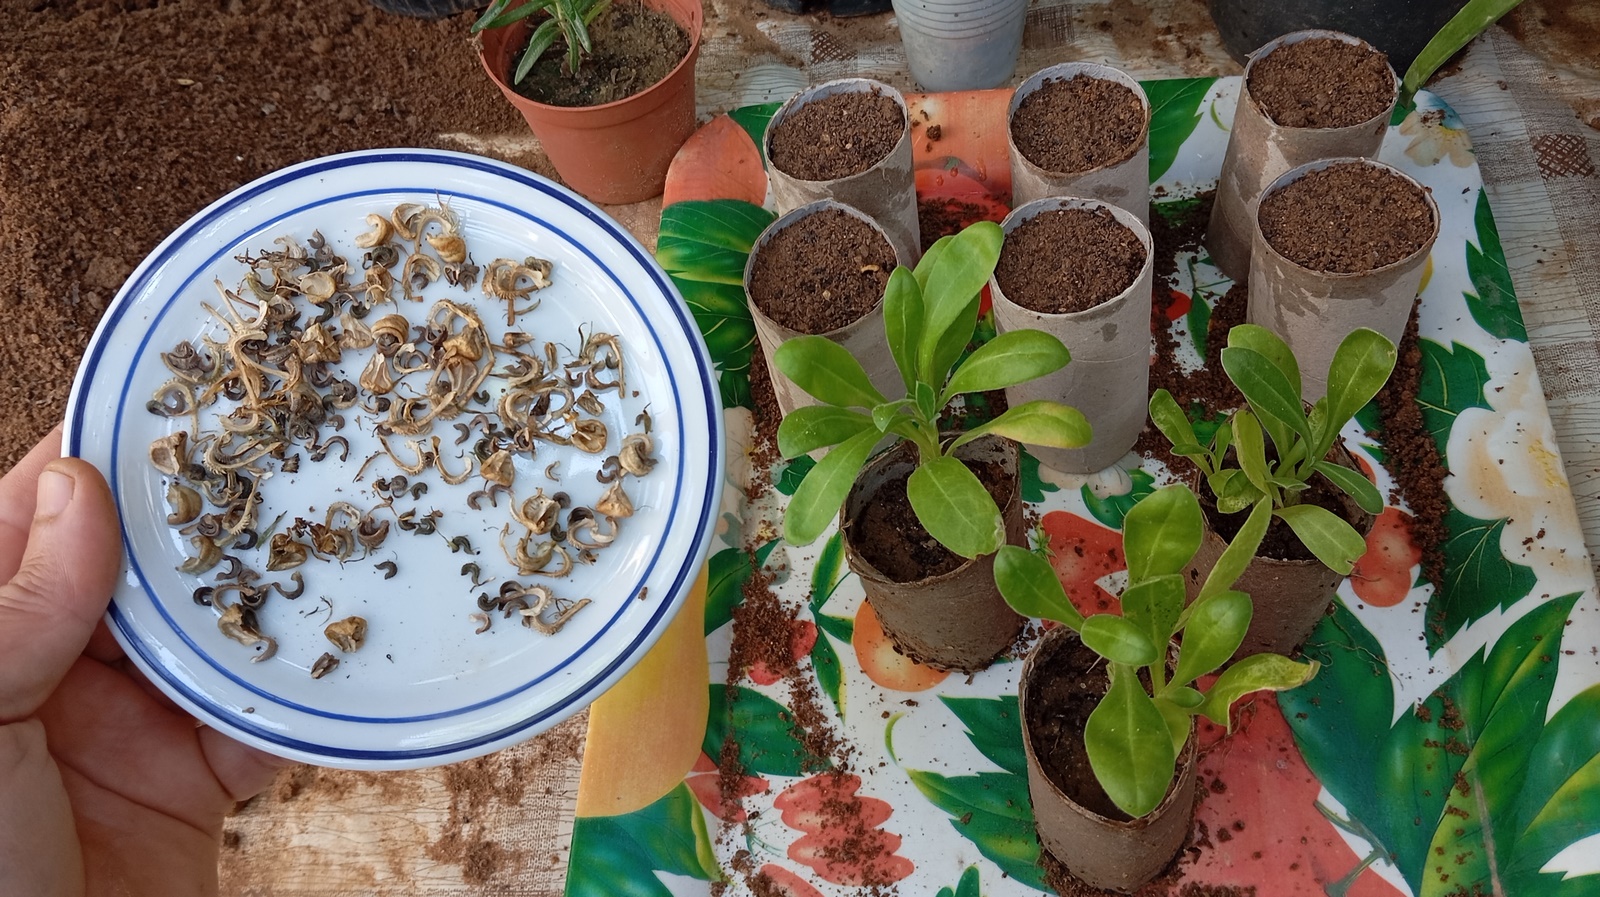 Transform your gardening routine with this innovative approach to starting Calendula seeds - using toilet paper rolls as biodegradable seed starters! Calendula, also known as pot marigold, is a beloved flower that not only adds a vibrant splash of color to your garden but also has a range of practical uses, from culinary applications to natural skincare remedies.